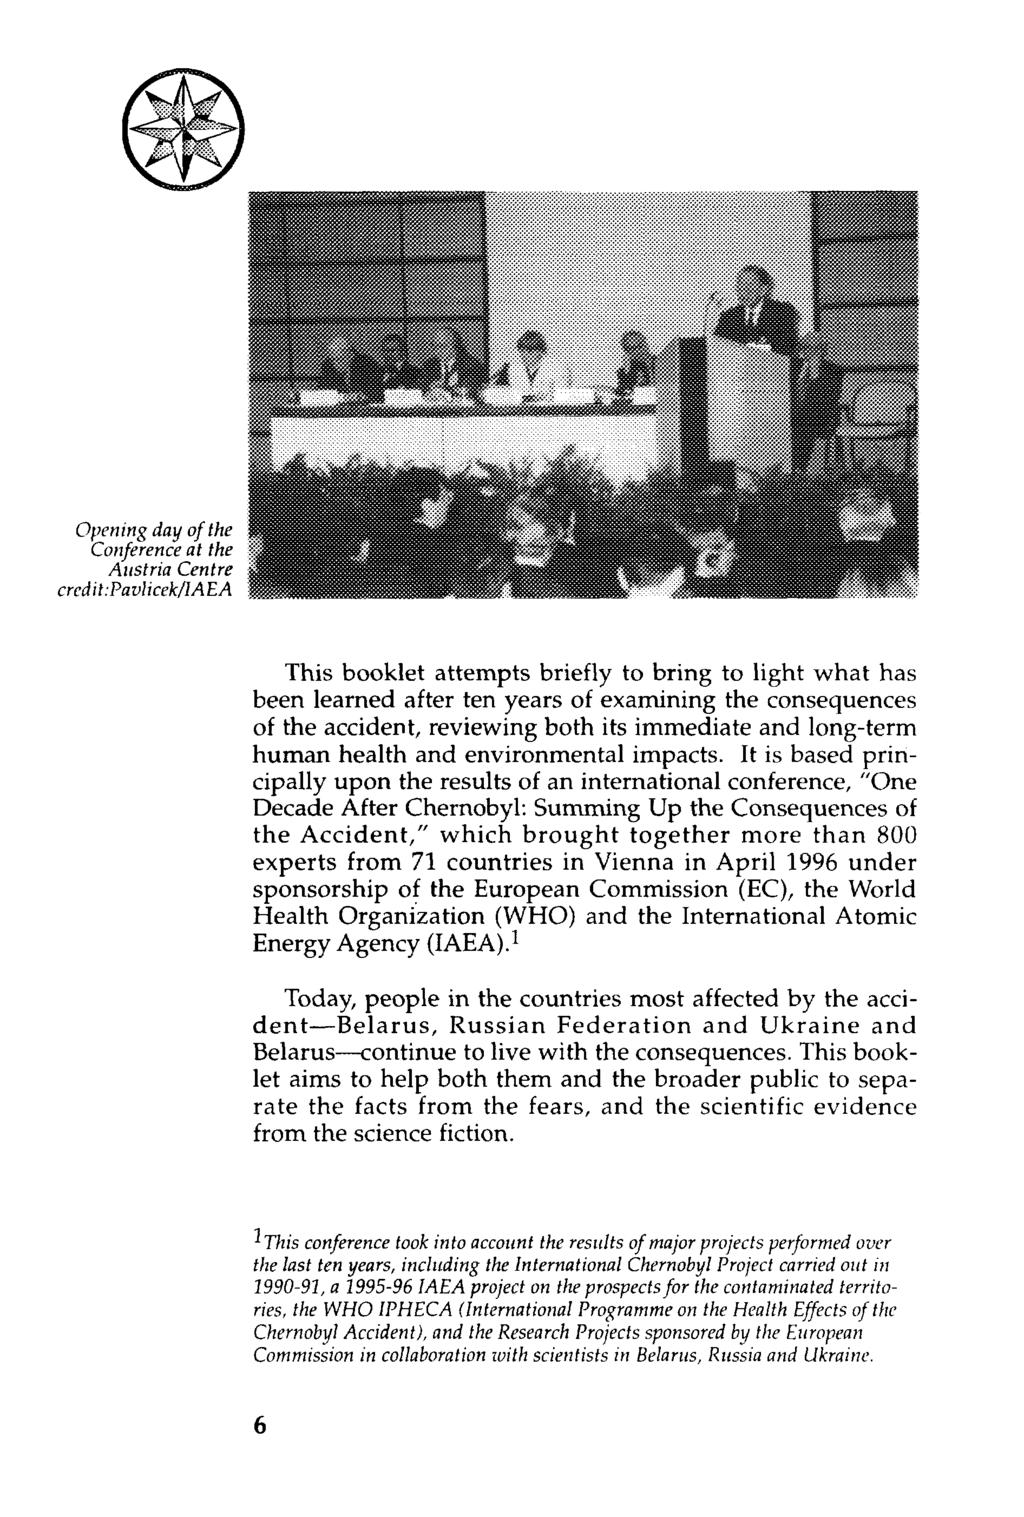 Opening day o f the Conference at the Austria Centre credit :Pavlicek/lAEA This booklet attempts briefly to bring to light what has been learned after ten years of examining the consequences of the